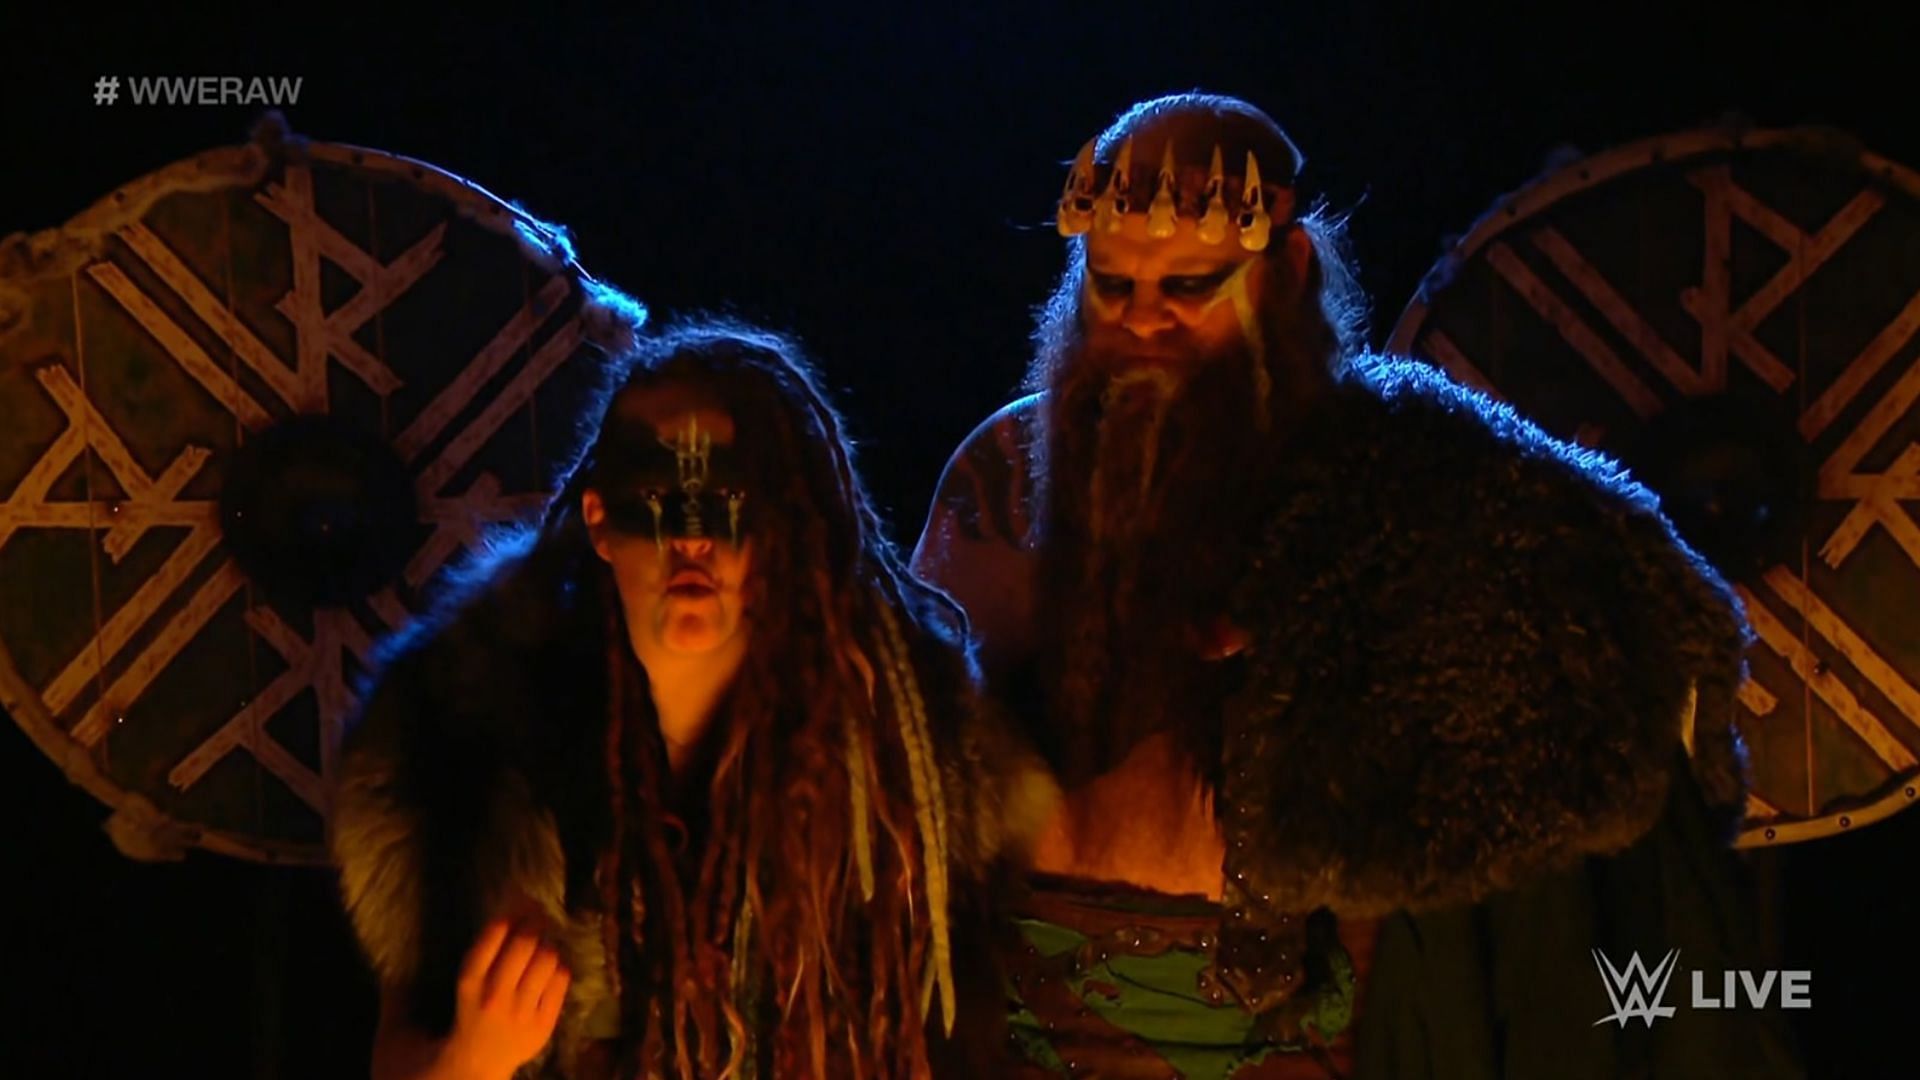 Ivar and Valhalla of The Viking Raiders on WWE RAW